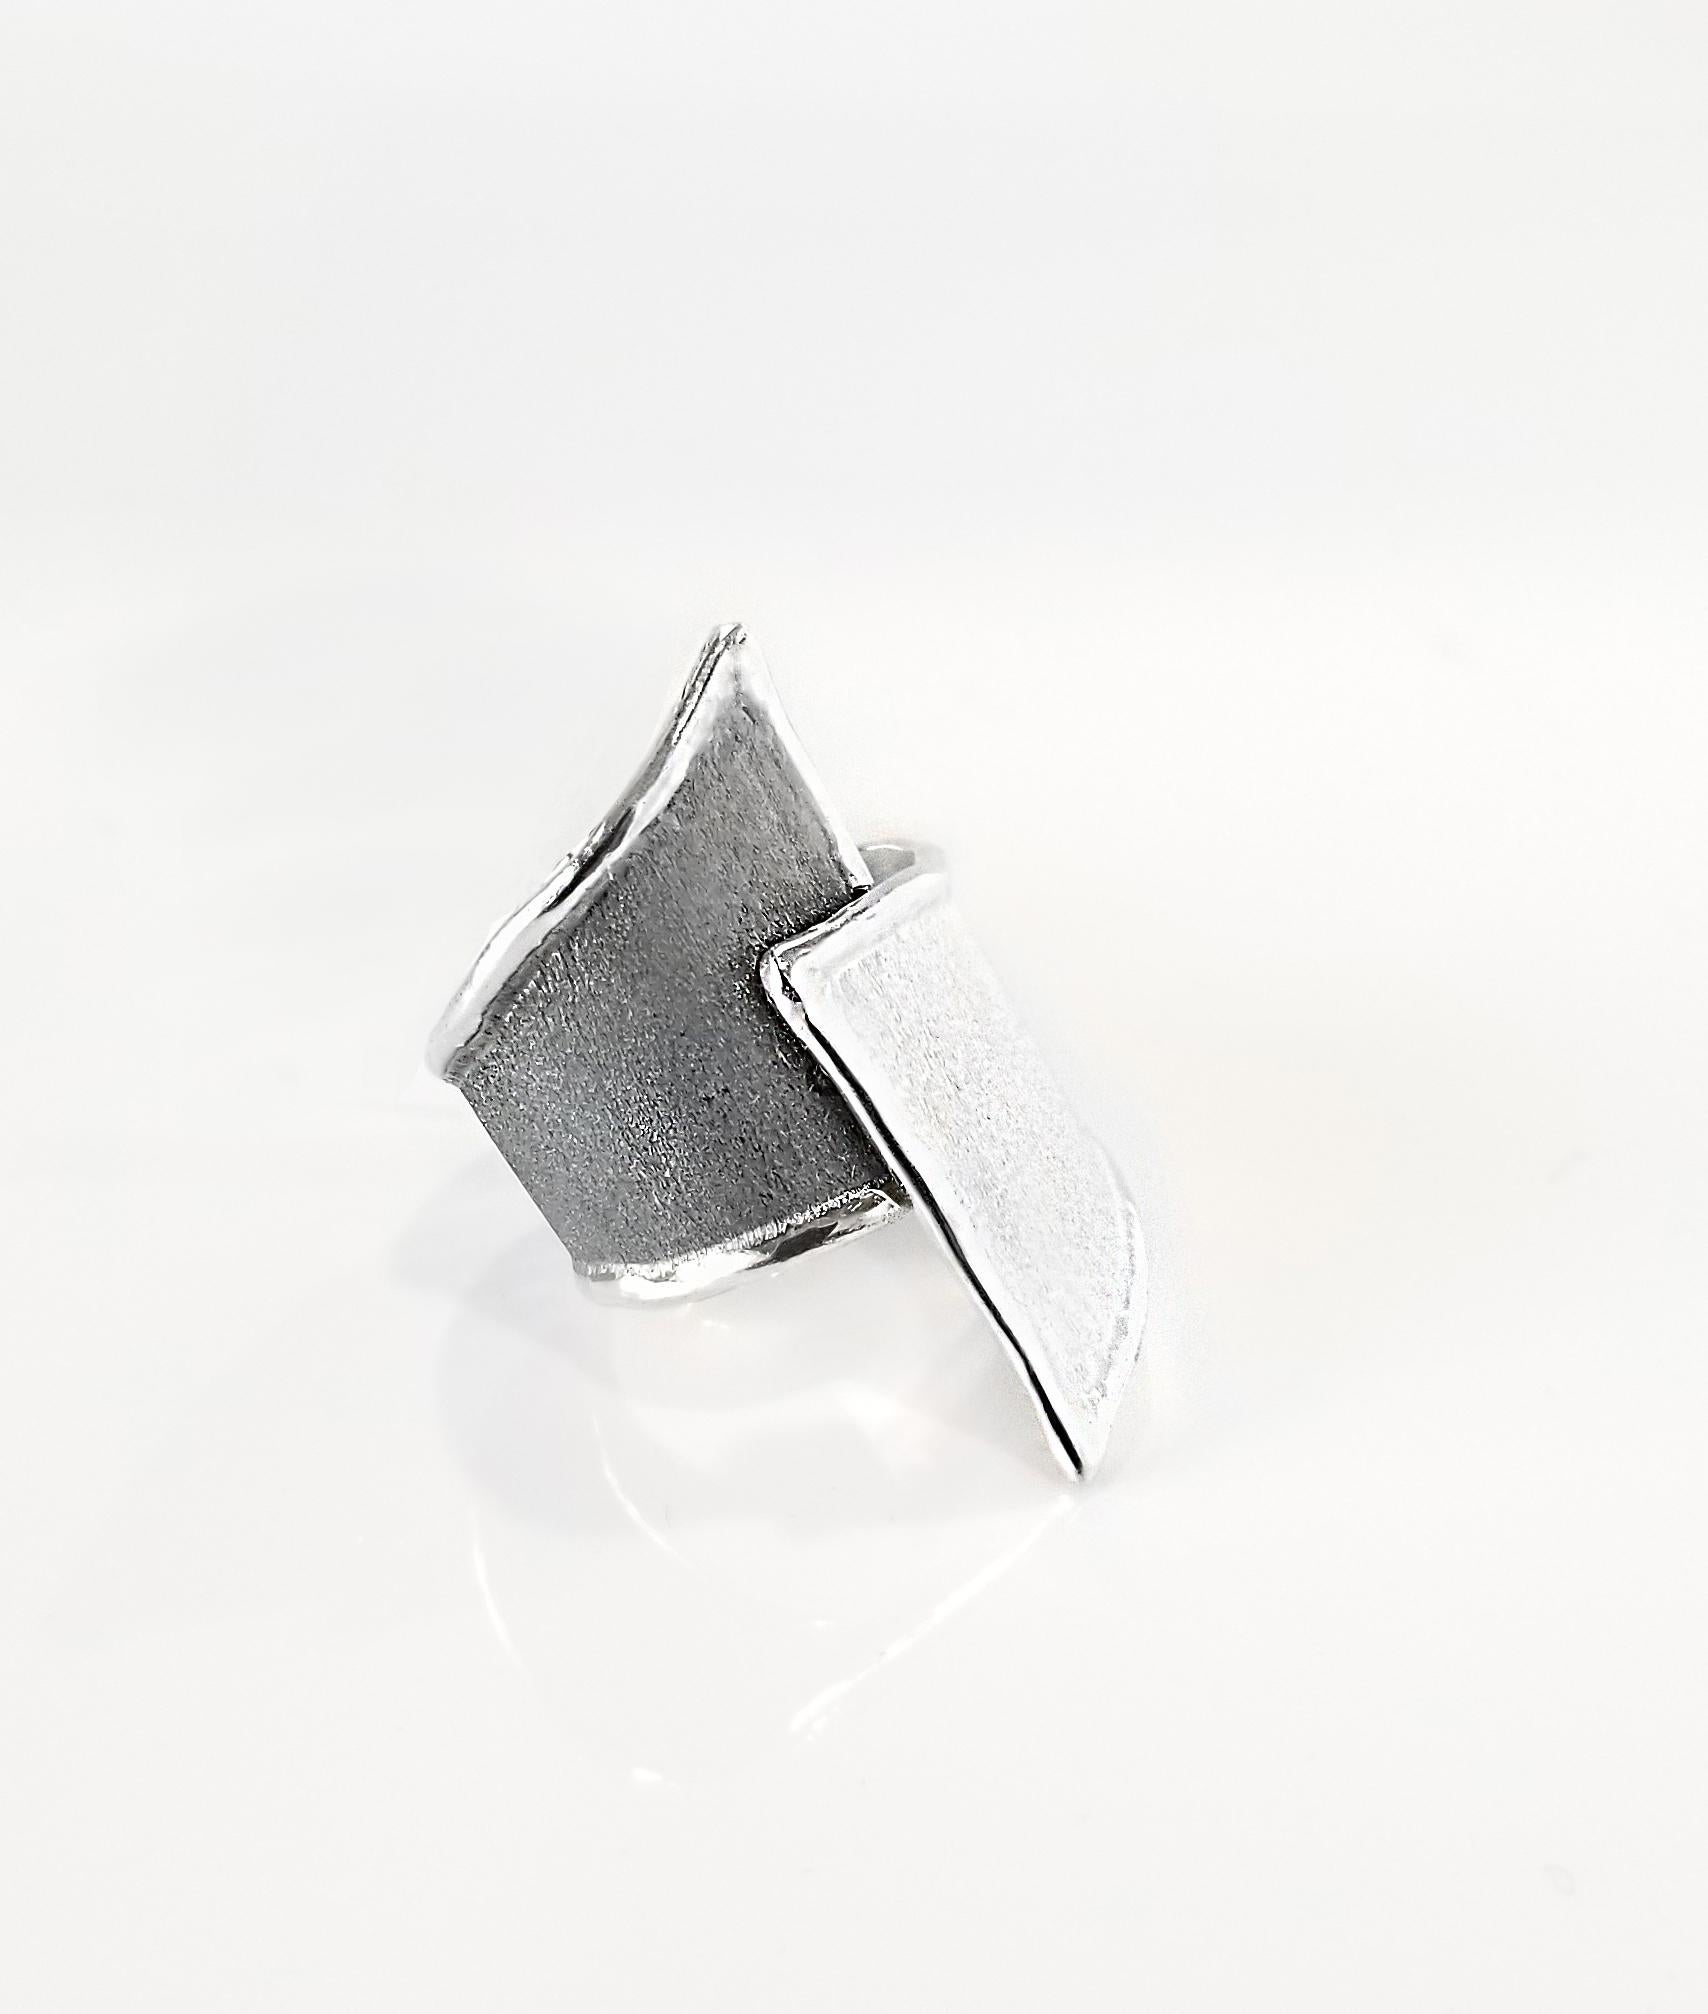 Yianni Creations Hephestos Collection 100% Handmade Artisan Ring from Fine Silver. The ring features unique oxidized Rhodium background in contrast with the white opposite. The ring presents unique techniques of craftsmanship - brushed texture and